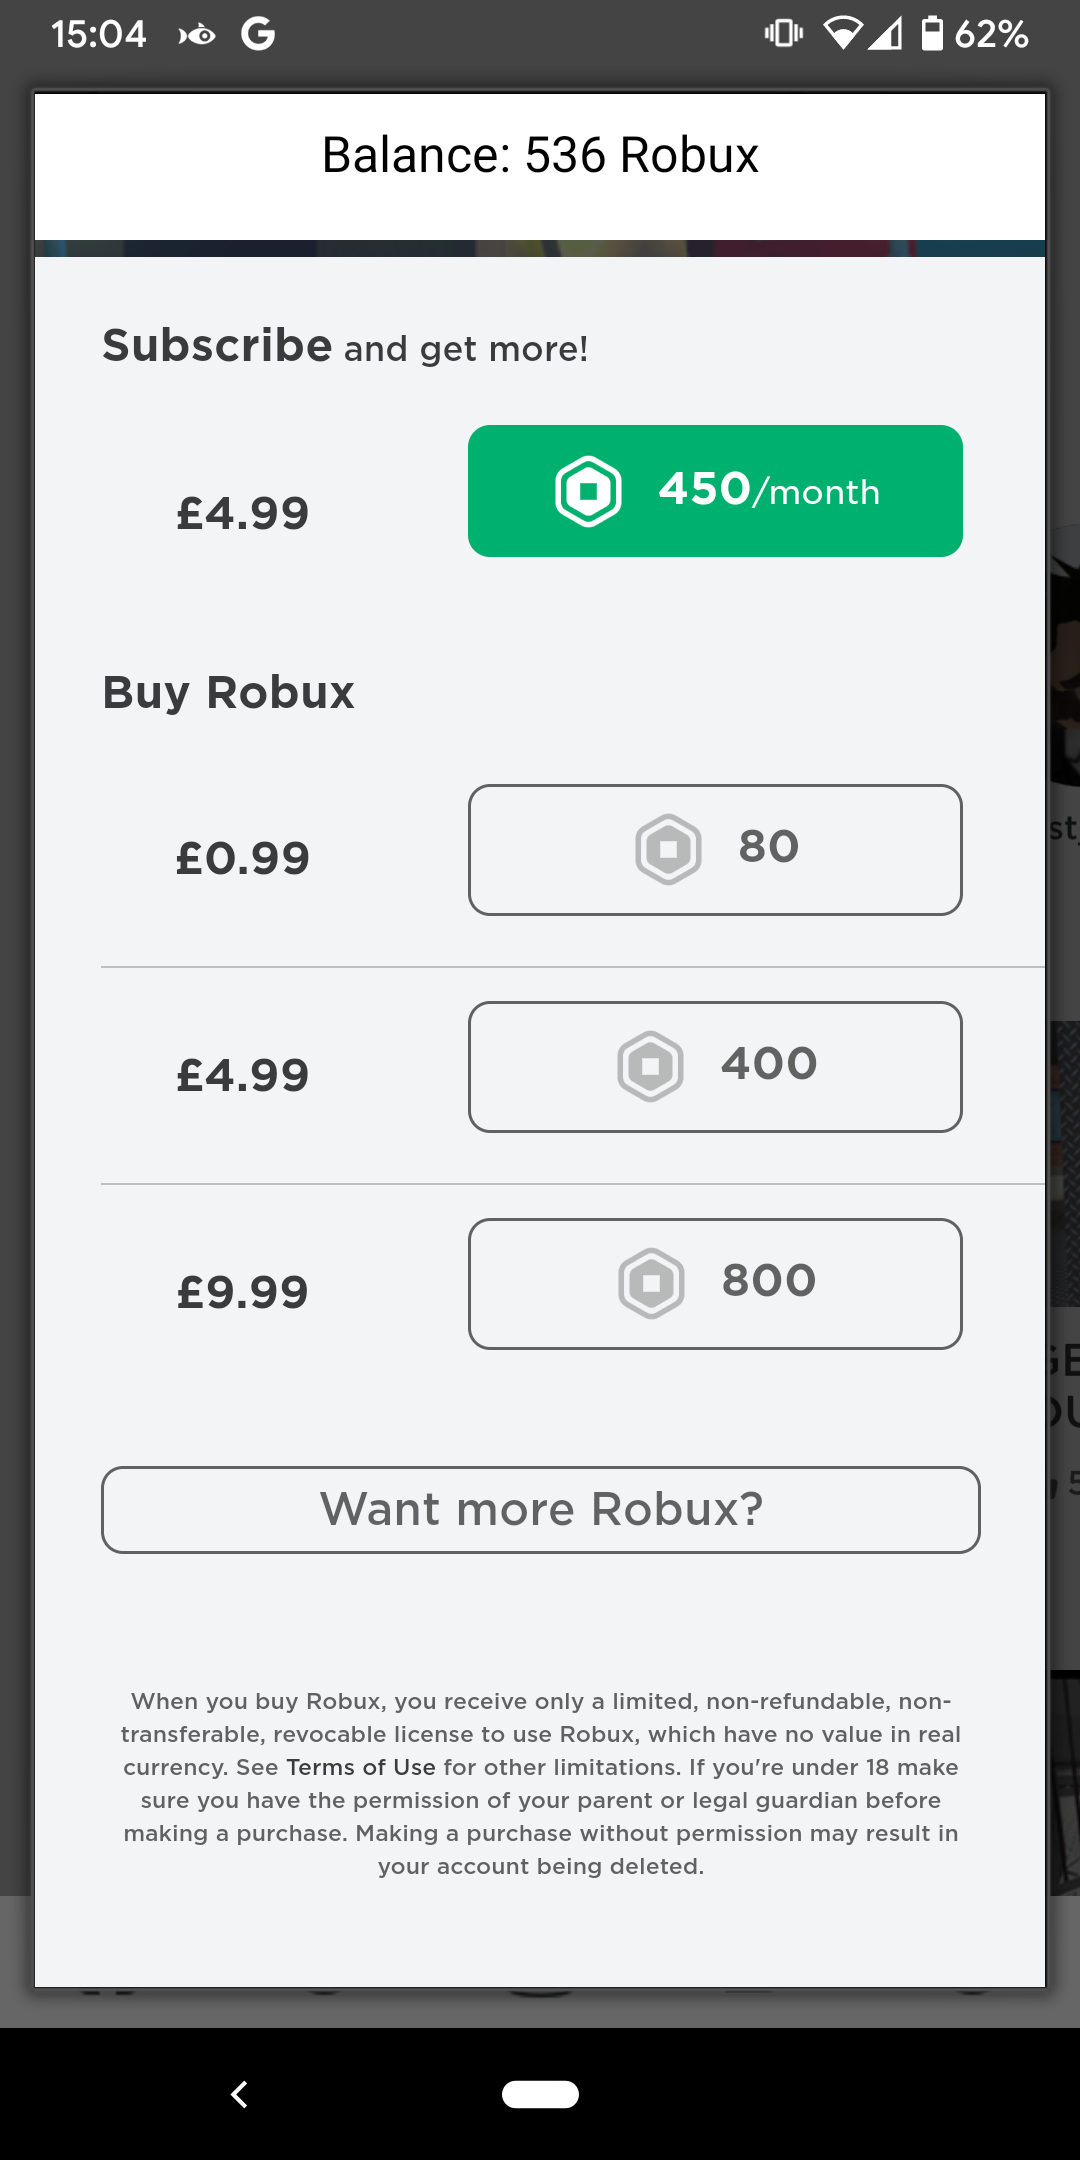 How To Buy Less Than 400 Robux